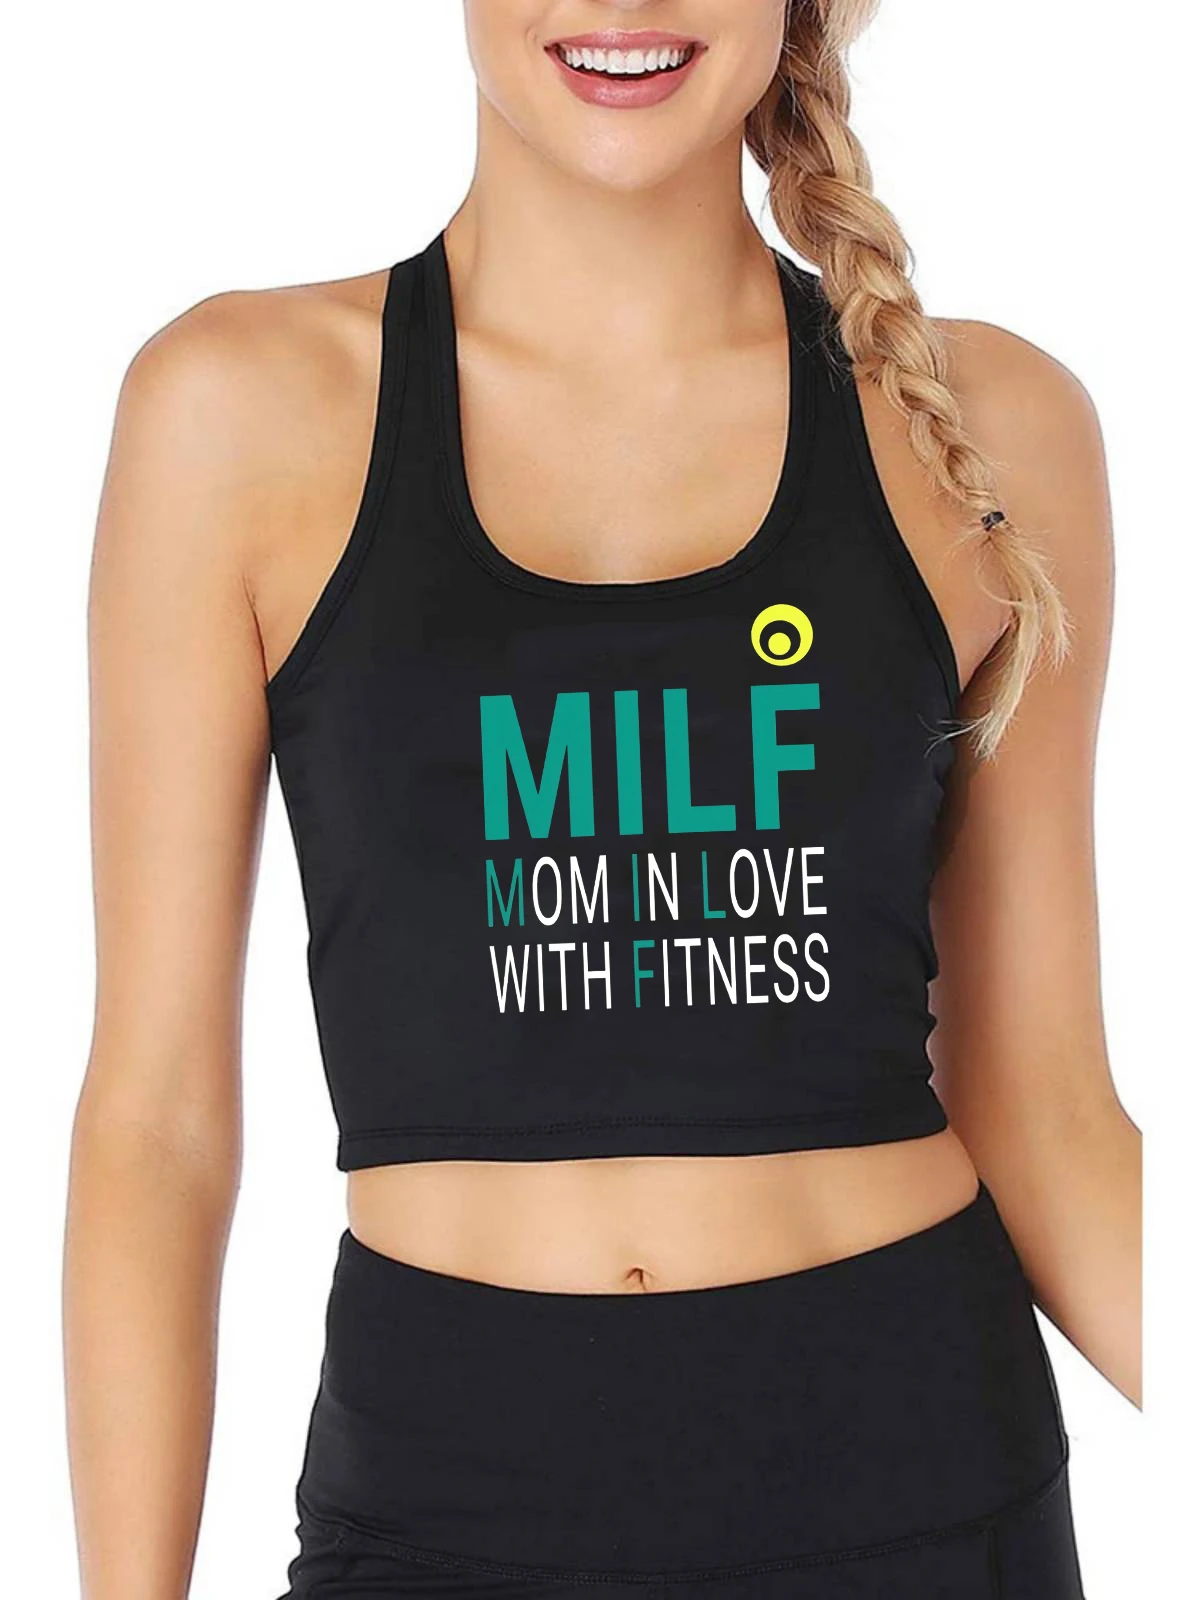 

MILF Mom In Love with Fitness Sayings Design Tank Tops Women's Humor Fun Sexy Crop Top Gym Sports Fitness Workout Camisole